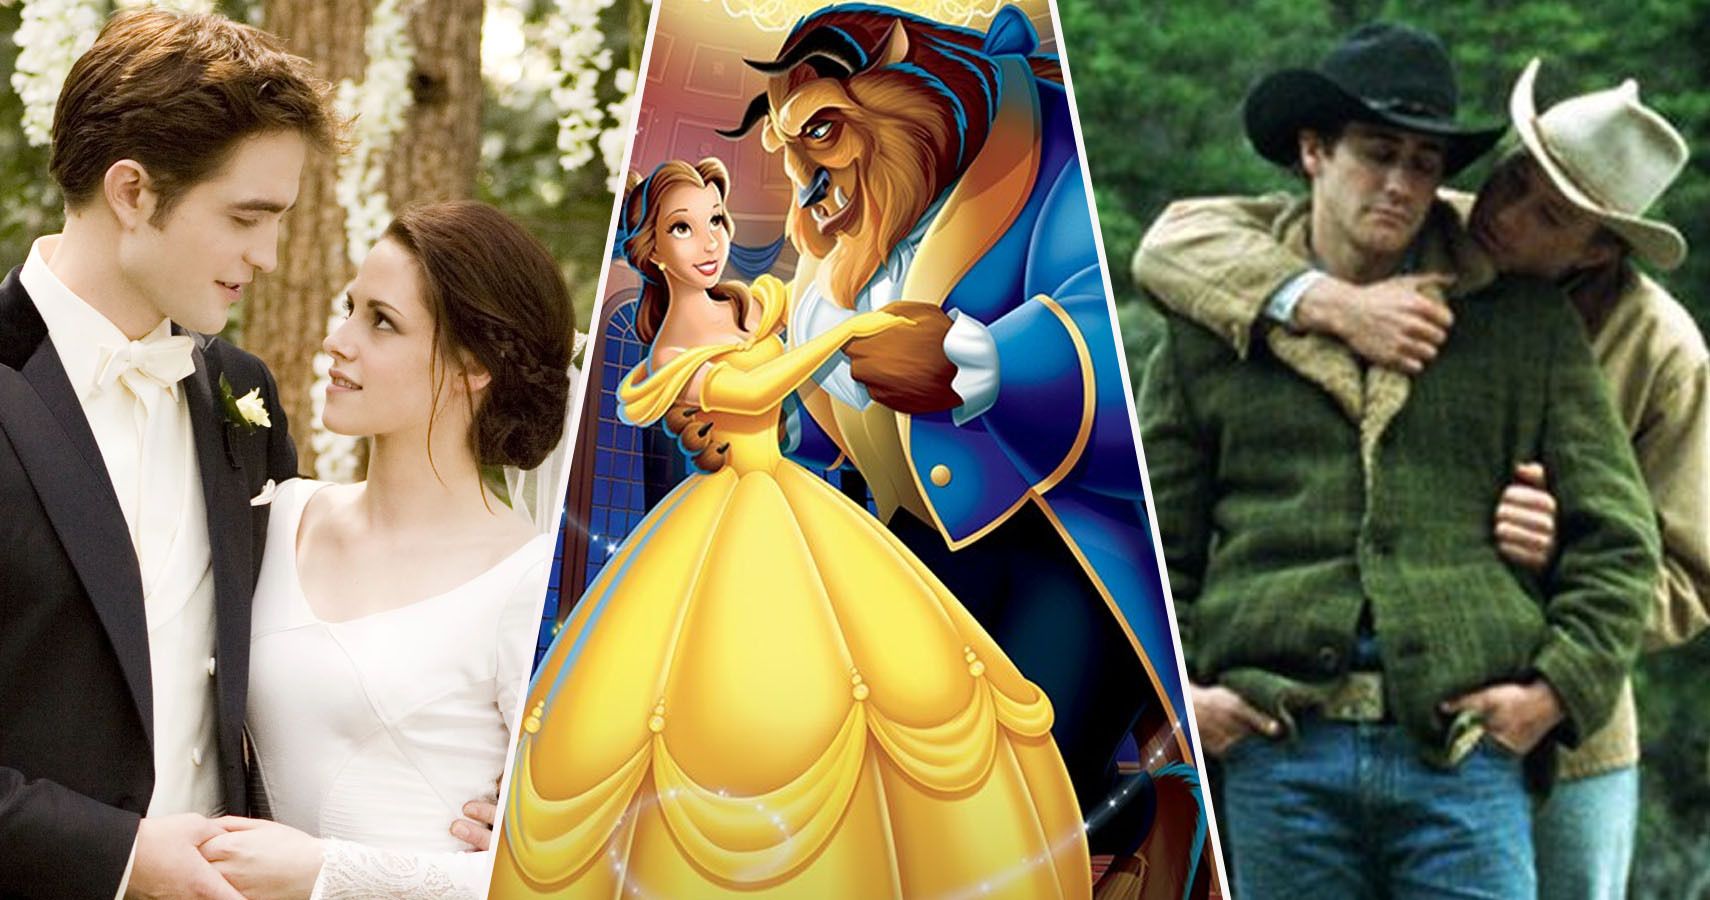 3 way split of the main couples from Twilight, Disney's Beauty and the Beast, and Brokeback Mountain